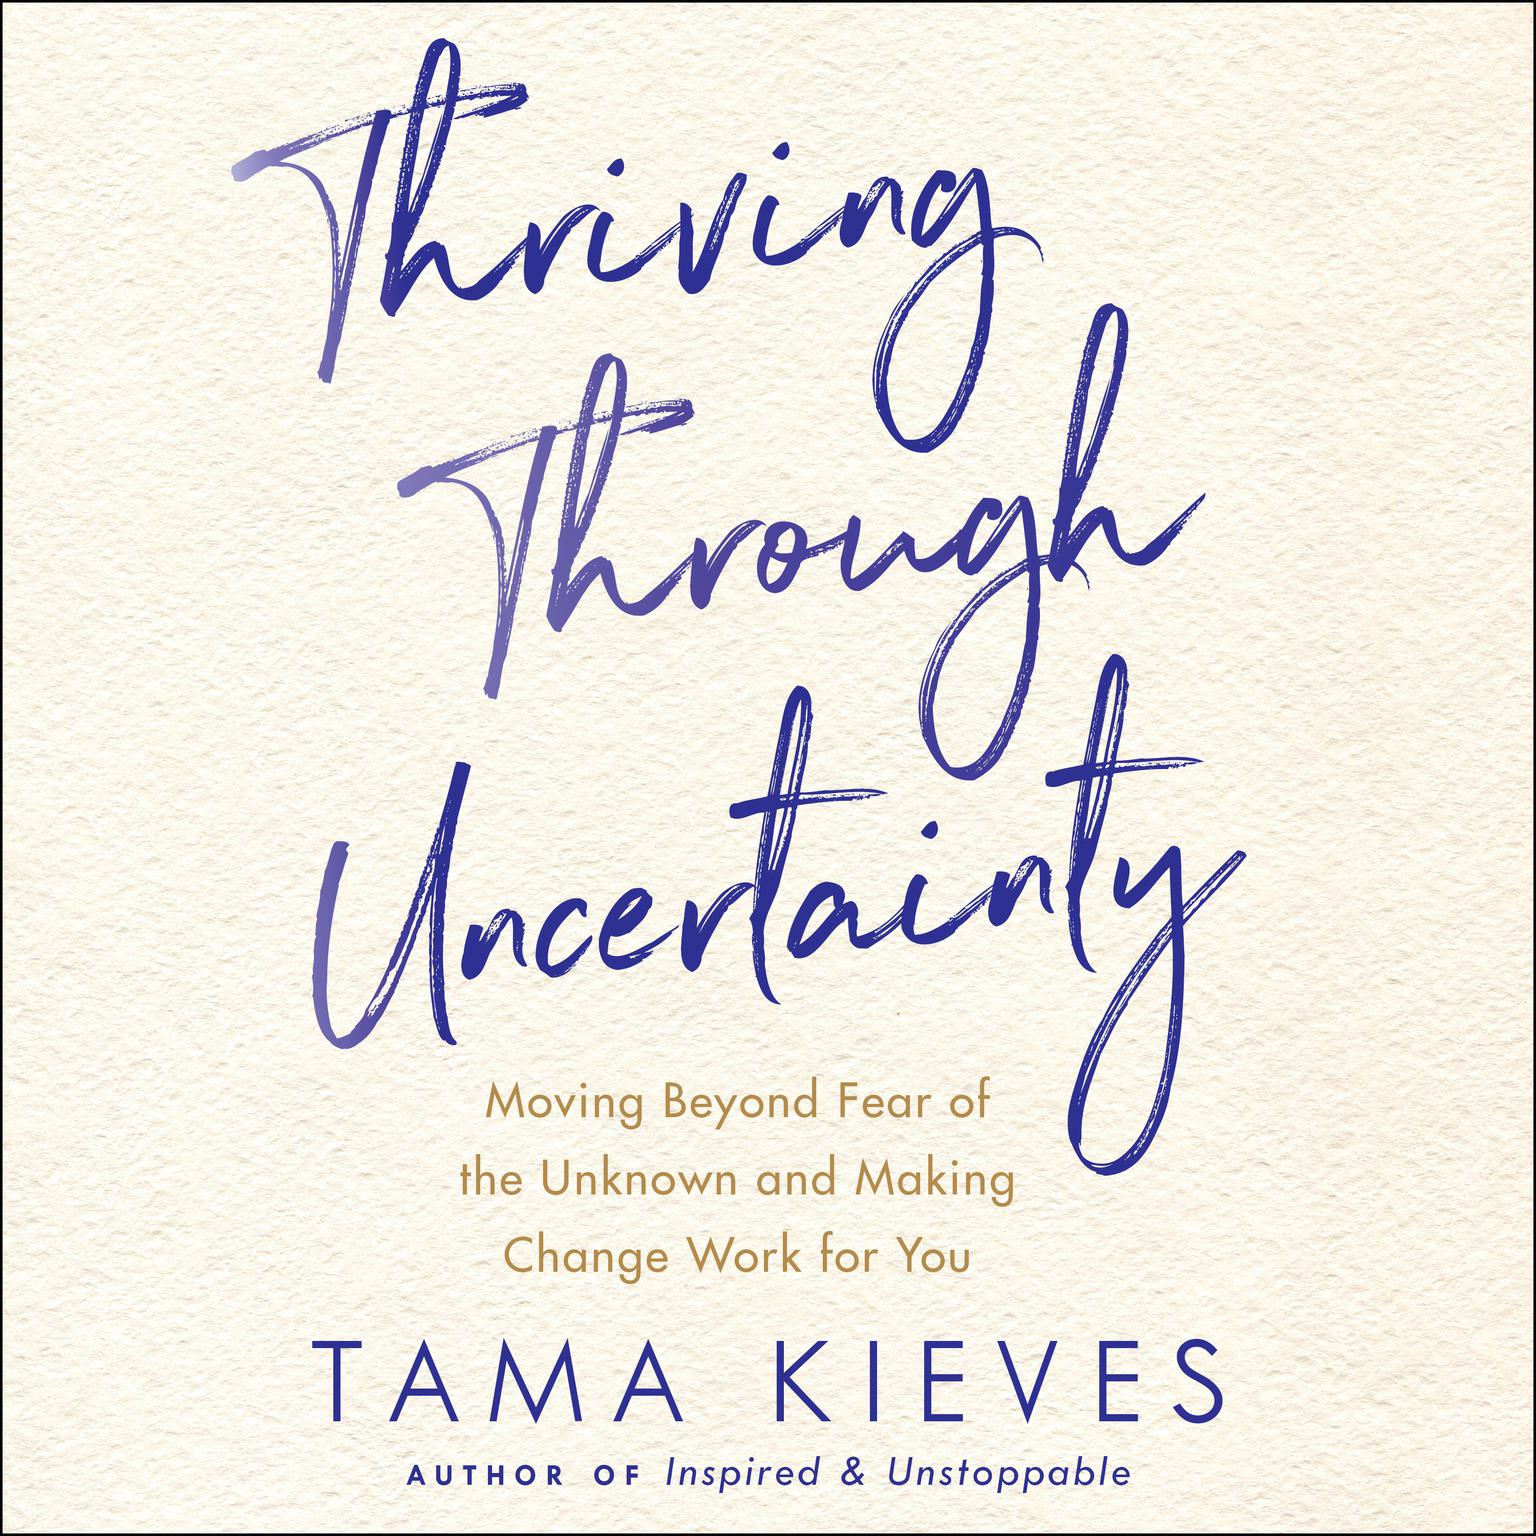 Thriving Through Uncertainty: Moving Beyond Fear of the Unknown and Making Change Work for You Audiobook, by Tama Kieves